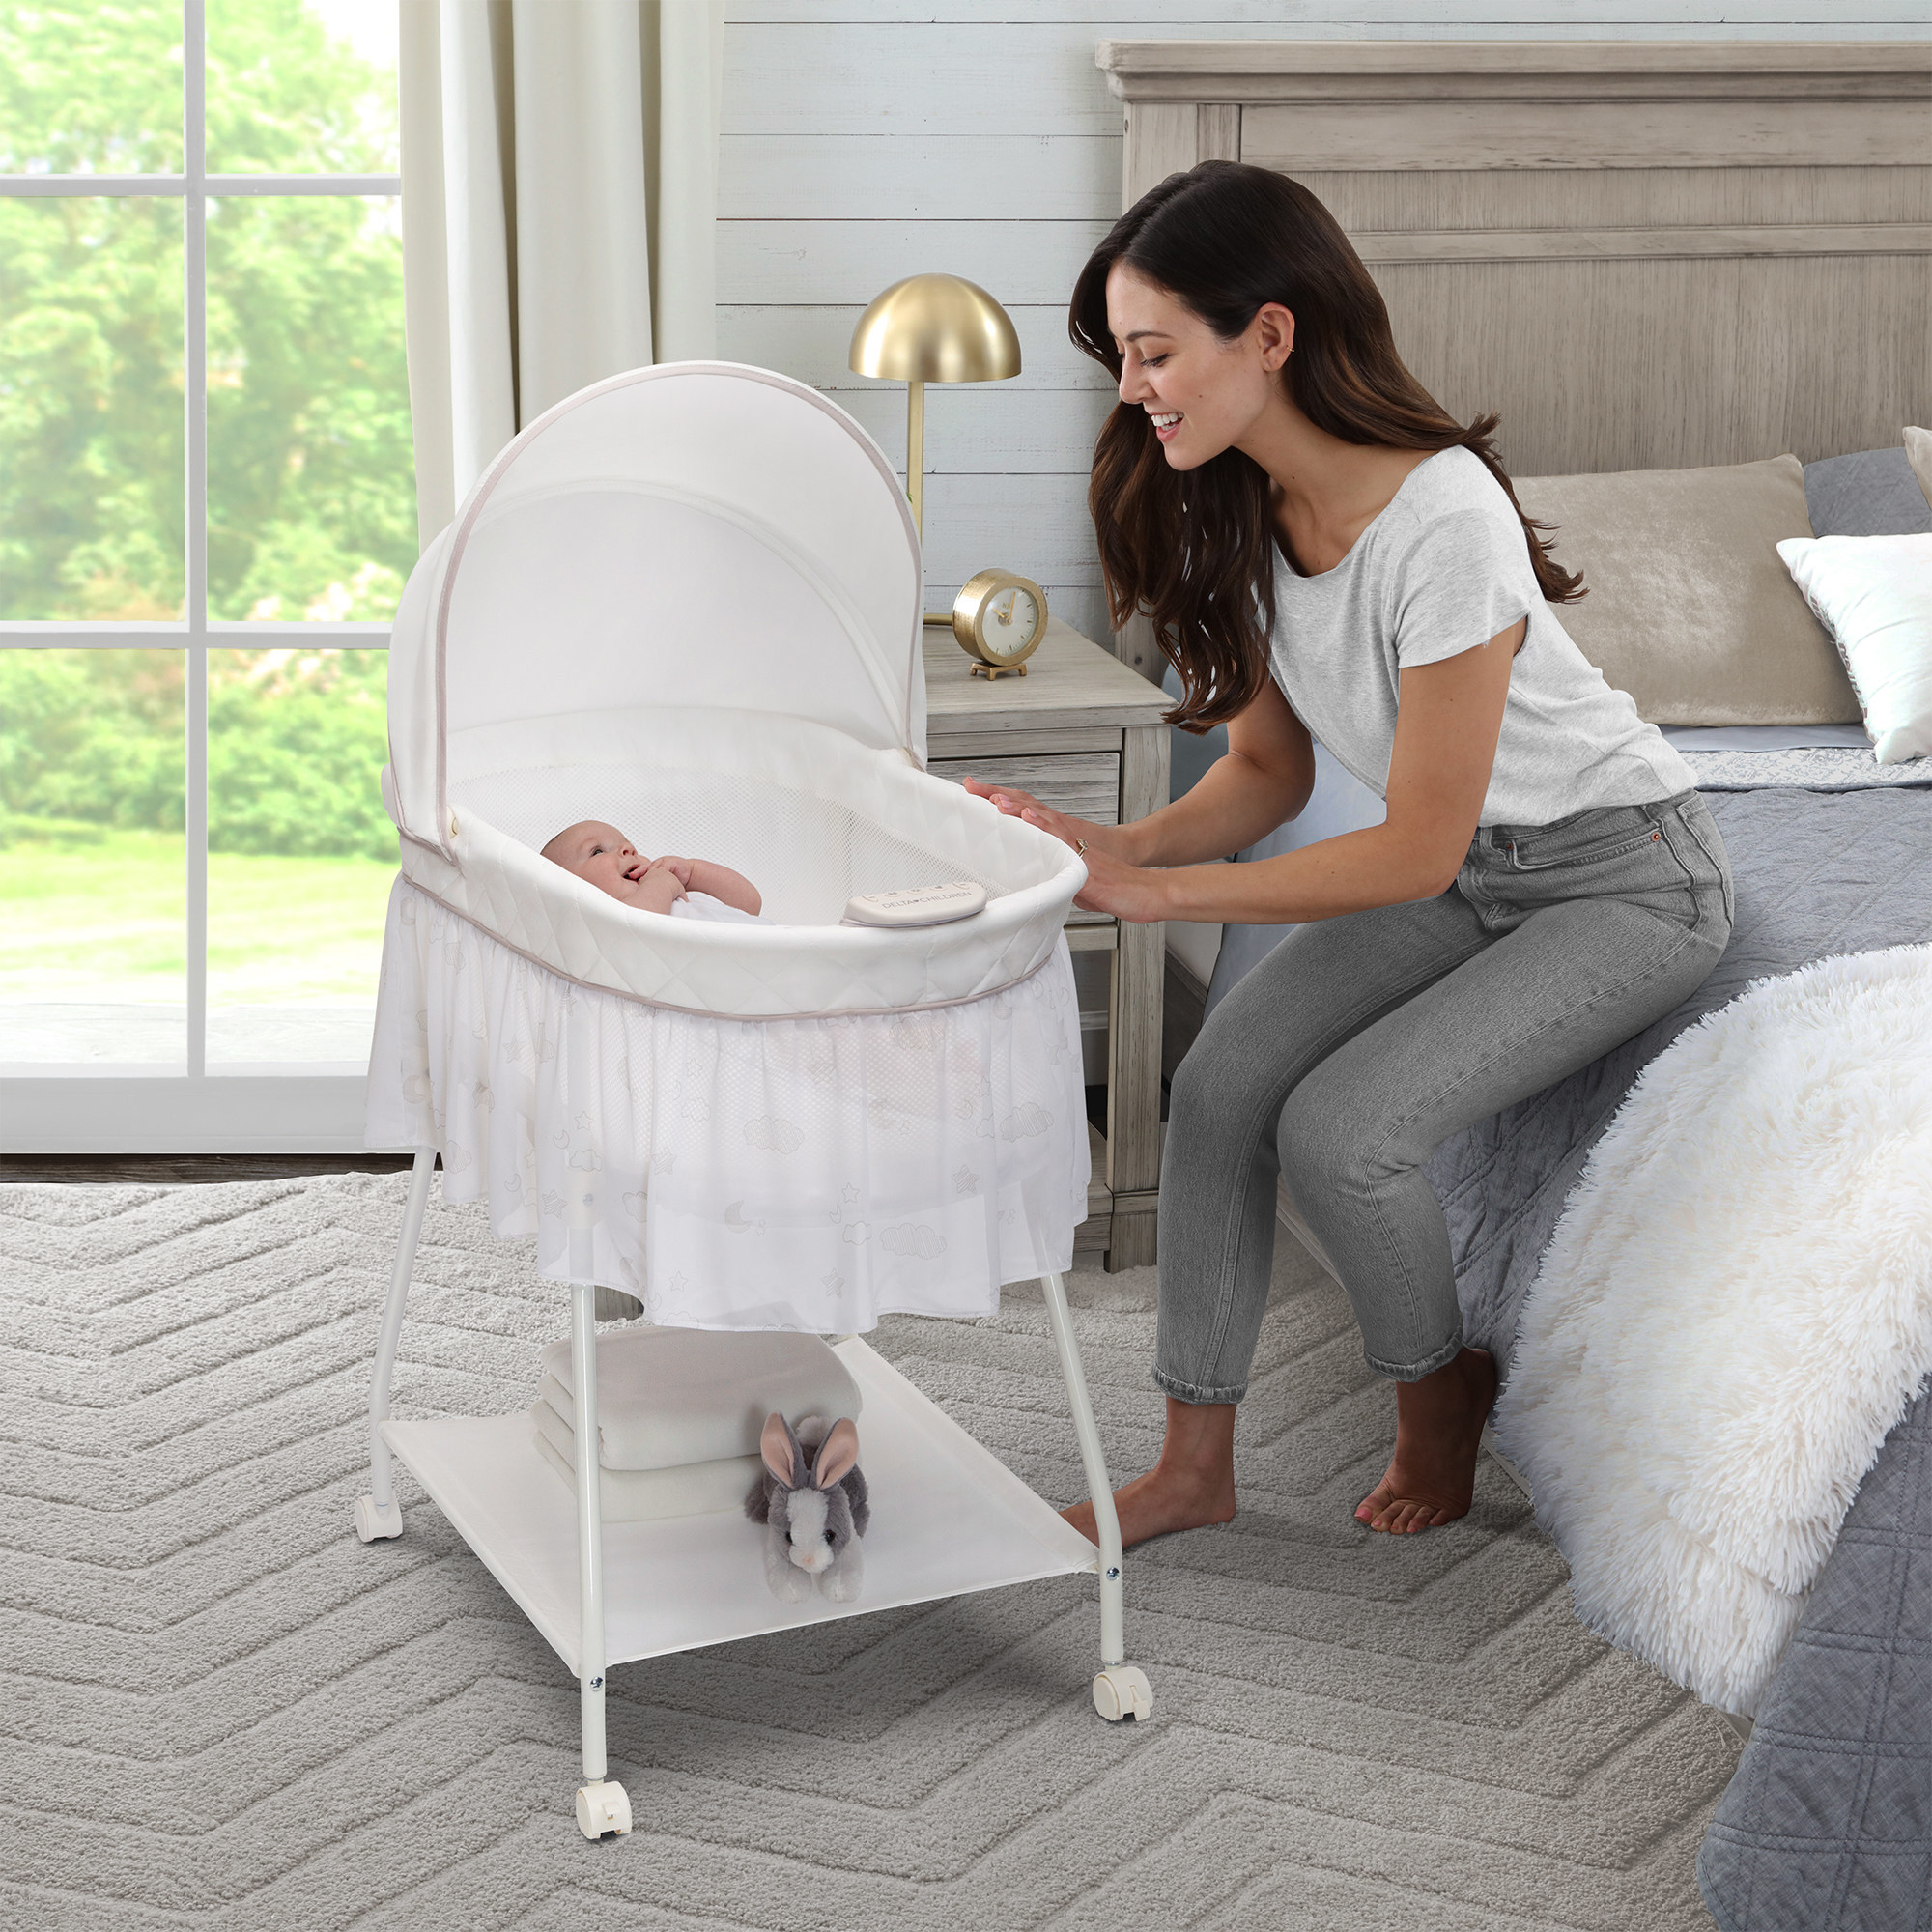 a baby in the white bassinet on wheels